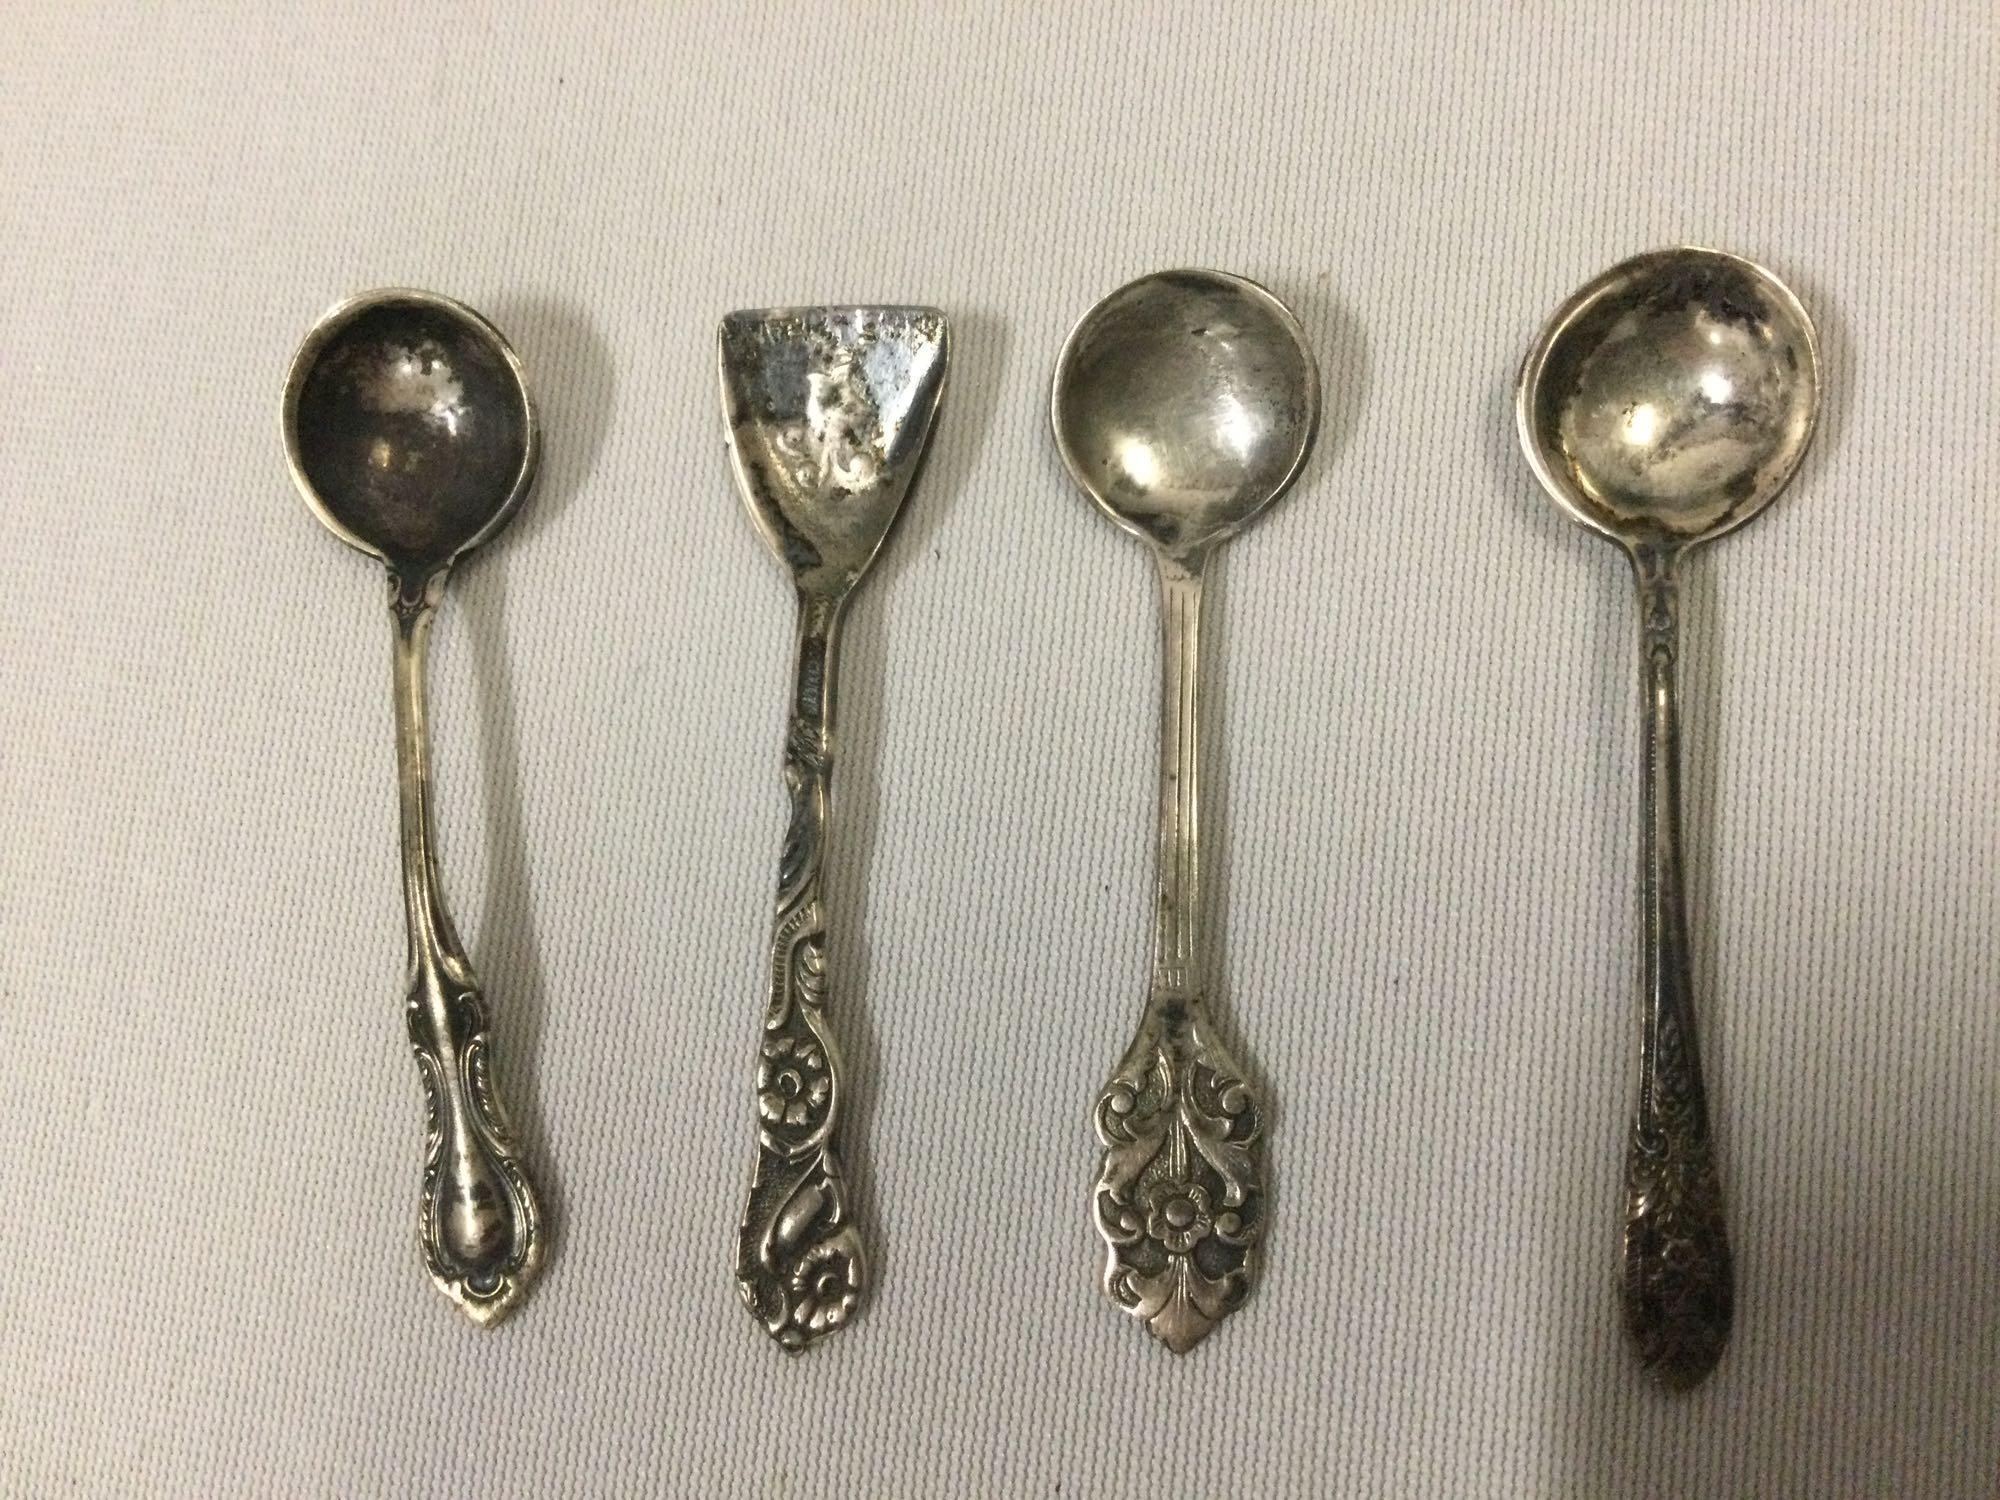 13 pc. lot of antique metal prayer bowls, 4 sterling spoons, 4 dragon head spoons, see pics